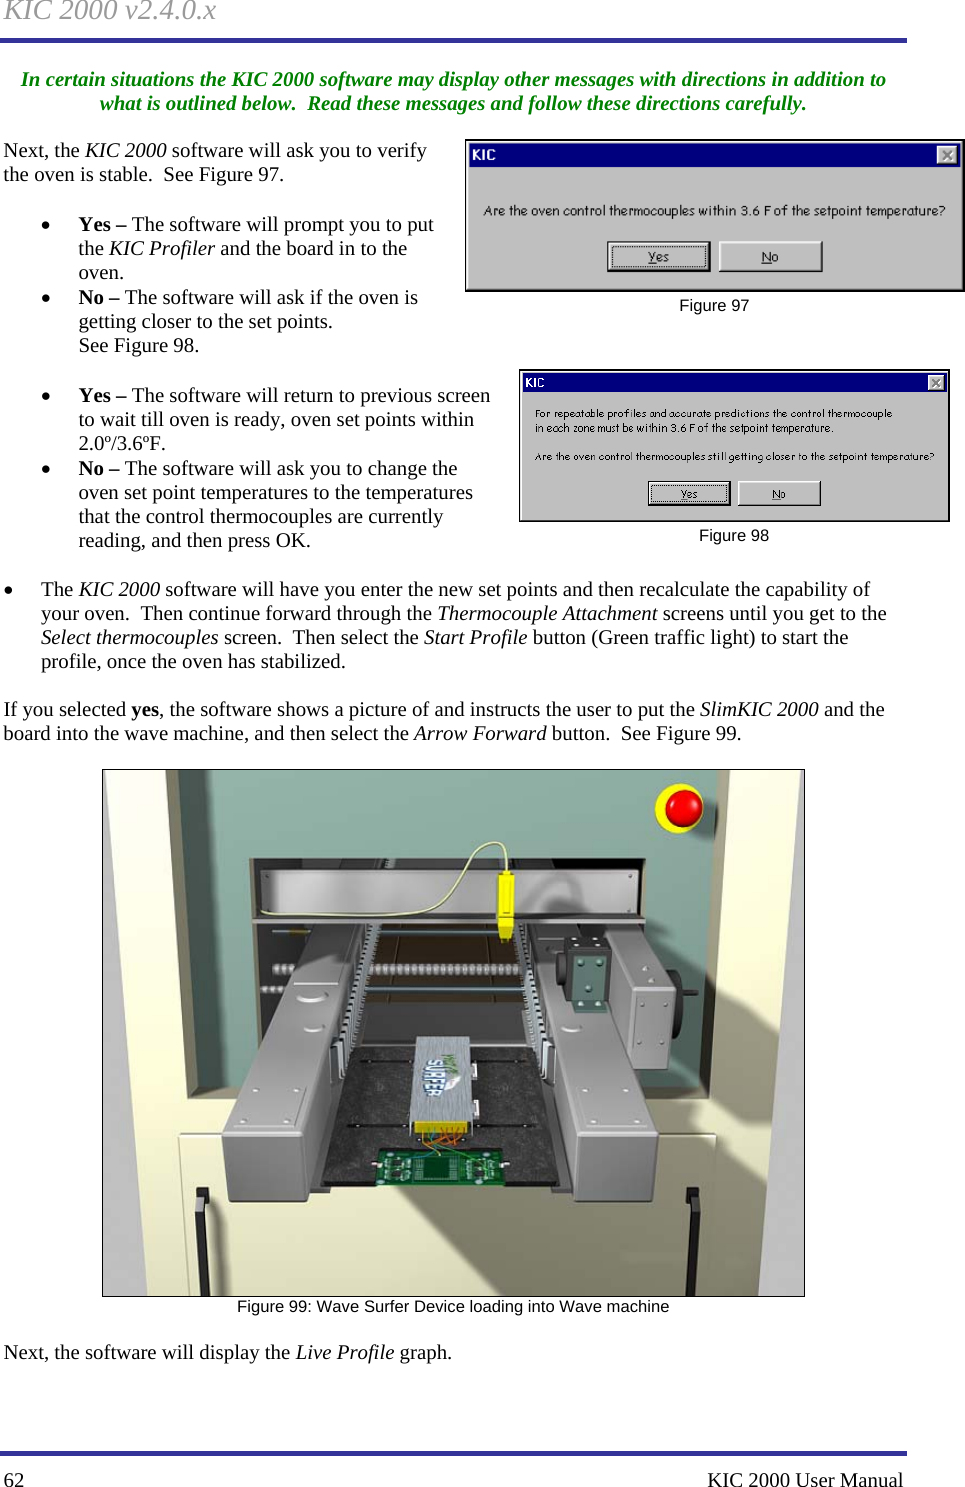 KIC 2000 v2.4.0.x 62    KIC 2000 User Manual In certain situations the KIC 2000 software may display other messages with directions in addition to what is outlined below.  Read these messages and follow these directions carefully.  Next, the KIC 2000 software will ask you to verify the oven is stable.  See Figure 97.    • Yes – The software will prompt you to put the KIC Profiler and the board in to the oven. • No – The software will ask if the oven is getting closer to the set points. See Figure 98.    • Yes – The software will return to previous screen to wait till oven is ready, oven set points within 2.0º/3.6ºF. • No – The software will ask you to change the oven set point temperatures to the temperatures that the control thermocouples are currently reading, and then press OK.  • The KIC 2000 software will have you enter the new set points and then recalculate the capability of your oven.  Then continue forward through the Thermocouple Attachment screens until you get to the Select thermocouples screen.  Then select the Start Profile button (Green traffic light) to start the profile, once the oven has stabilized.  If you selected yes, the software shows a picture of and instructs the user to put the SlimKIC 2000 and the board into the wave machine, and then select the Arrow Forward button.  See Figure 99.     Figure 99: Wave Surfer Device loading into Wave machine  Next, the software will display the Live Profile graph.   Figure 97  Figure 98 